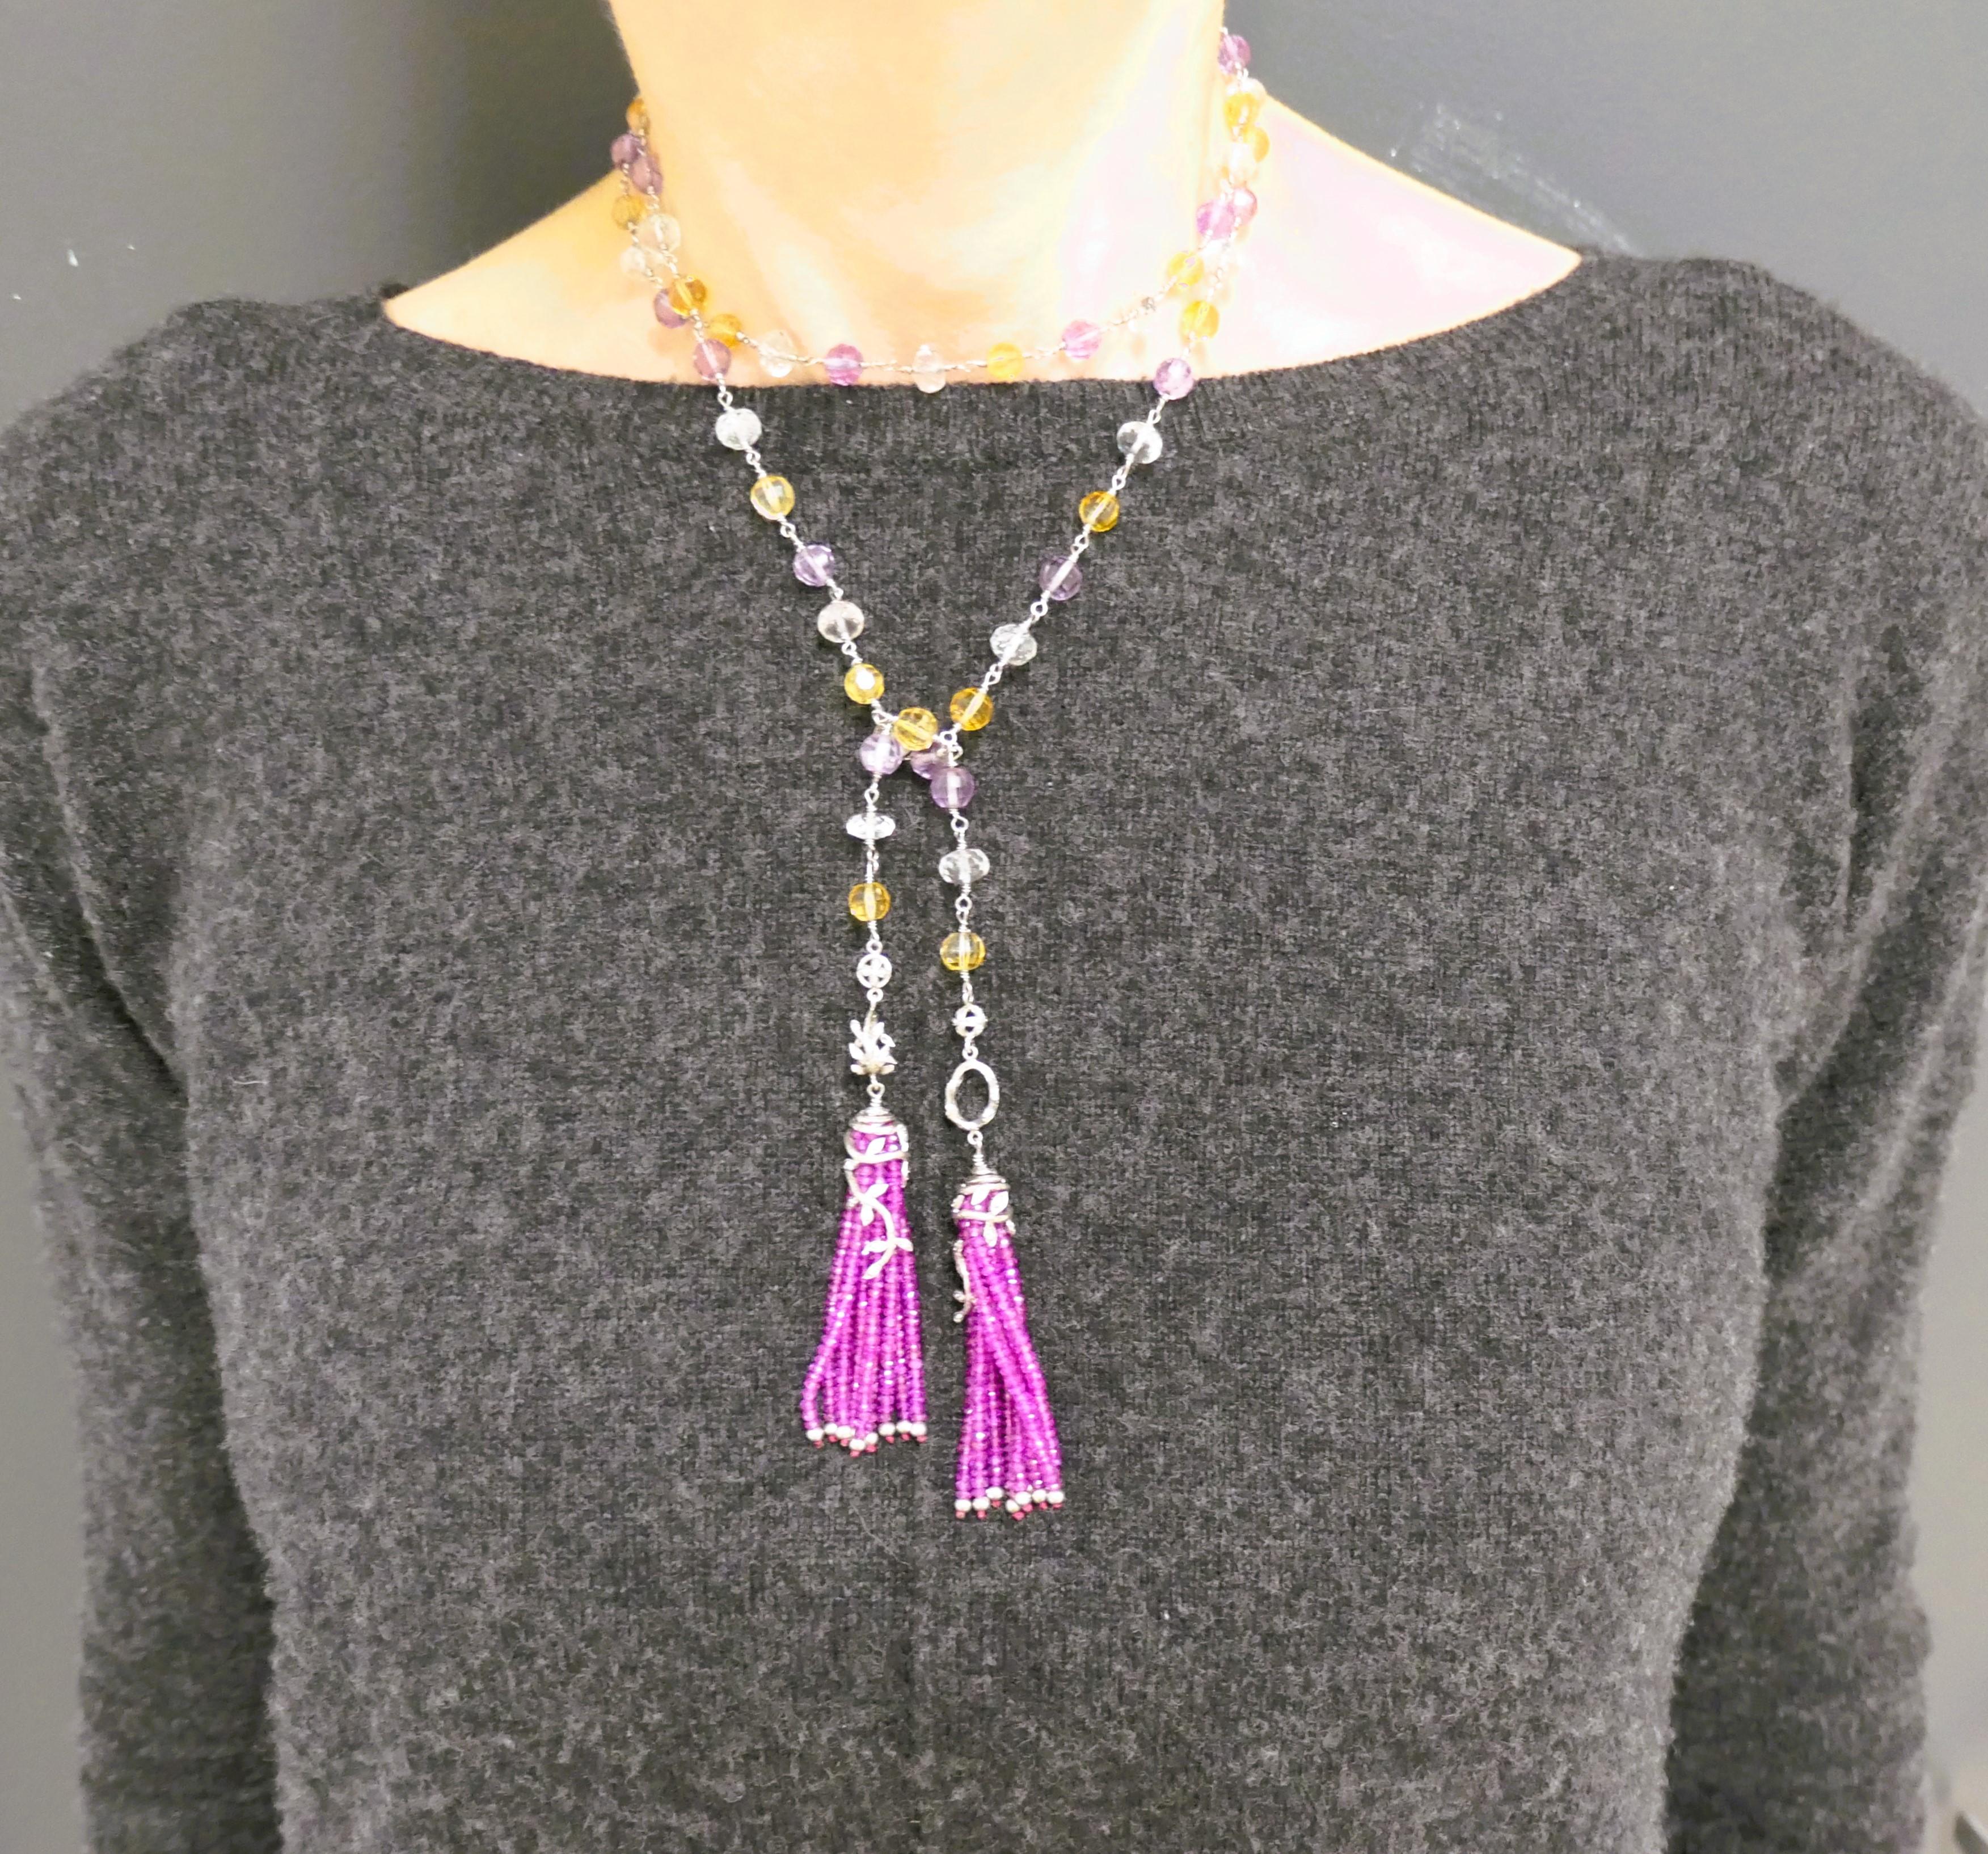 A gorgeous necklace by Cathy Waterman crafted out of multi color sapphire beads with platinum elements.
The carved sapphire beads of white, yellow, purple and pink color are strung on a twisted platinum wire. The ends of the necklace are designed as